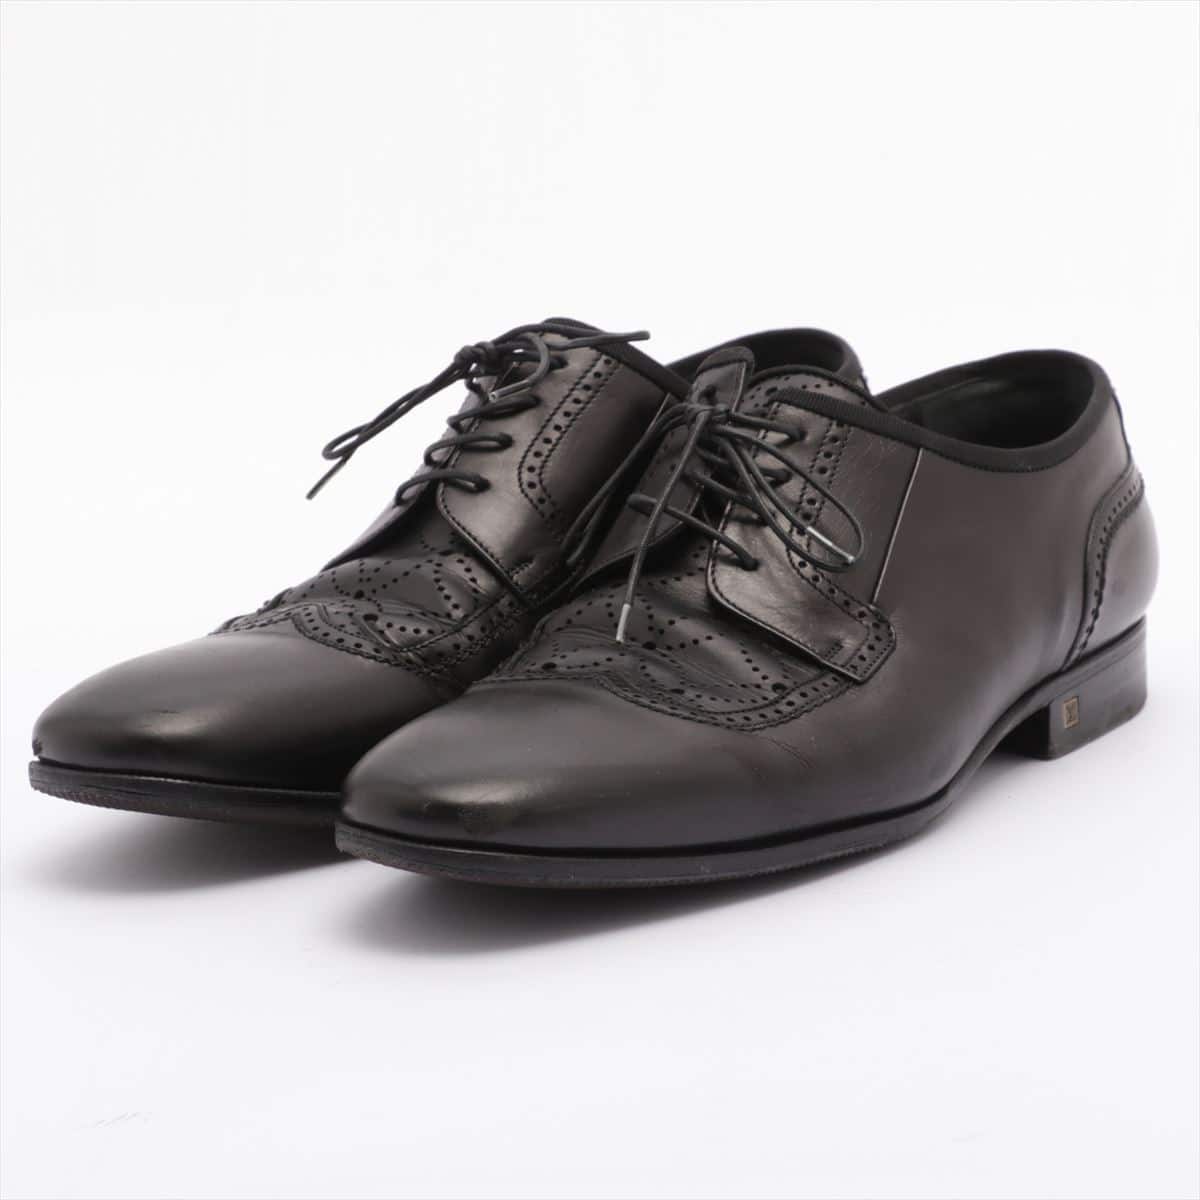 Louis Vuitton ST0037 Leather Leather shoes 7 Men's Black Resoled